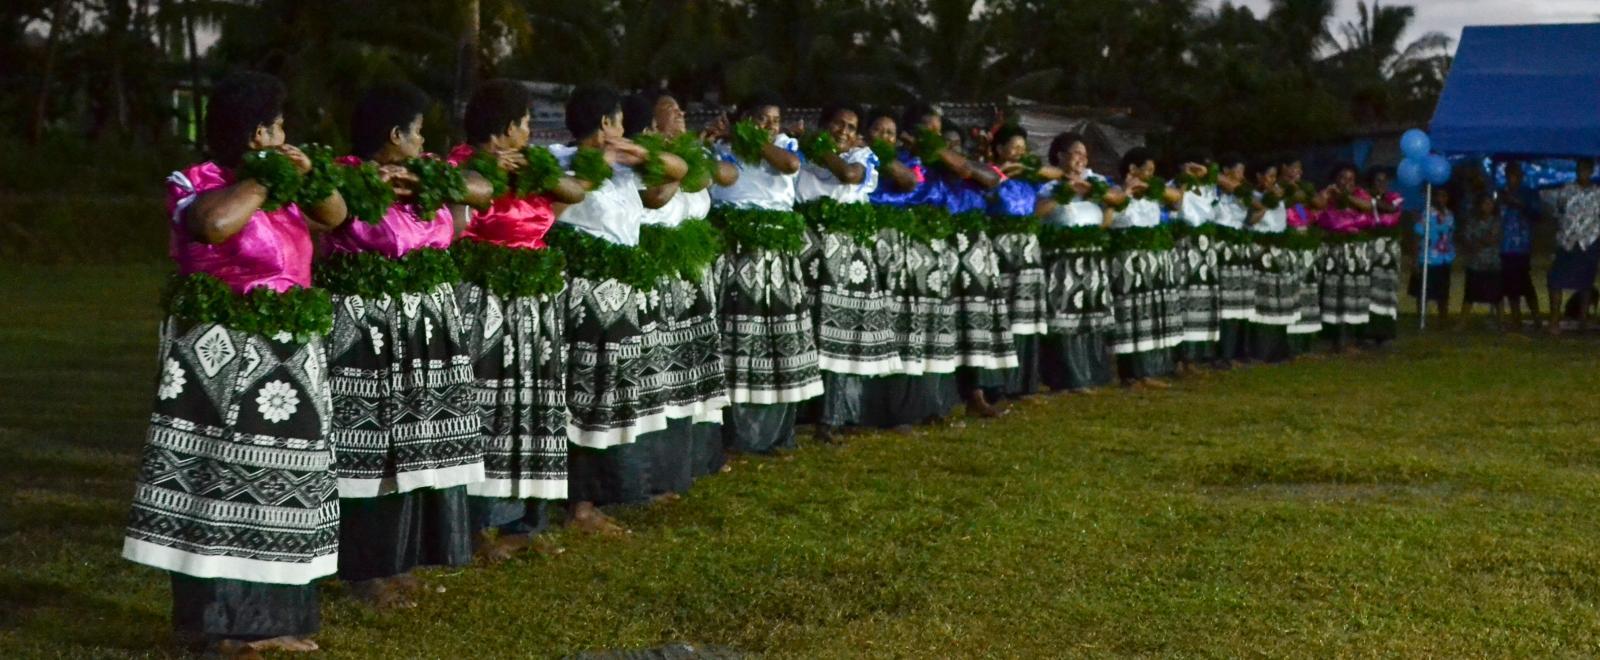 Local women in Fiji perform a ceremony for the opening of a Community Centre at a placement lead by Projects Abroad Staff. 